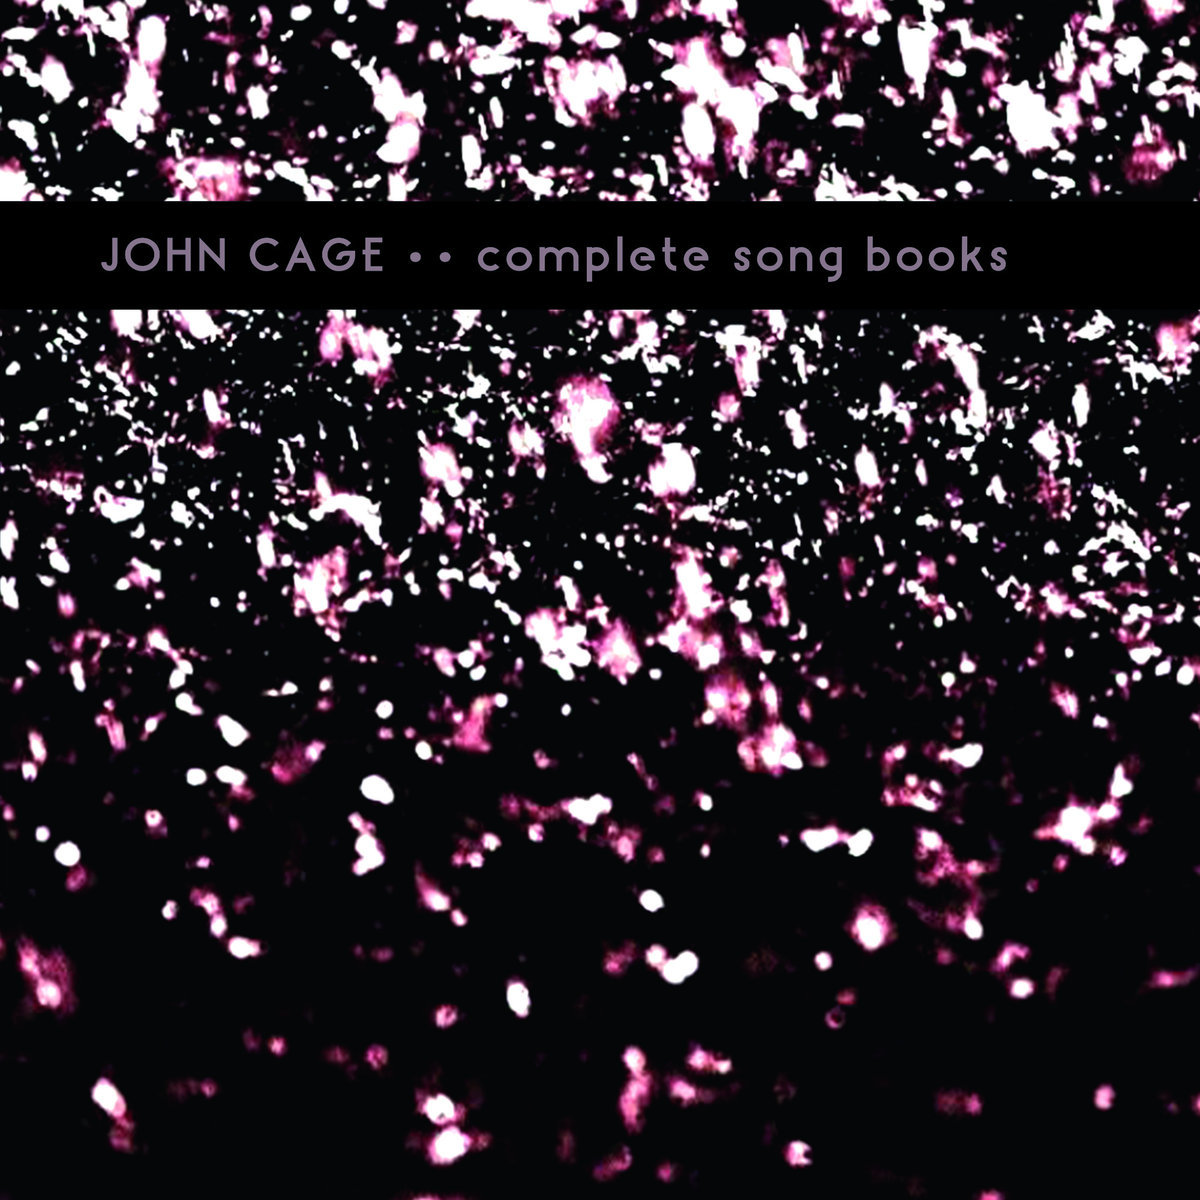 Bandcamp pick of the week: John Cage - Complete Song Books